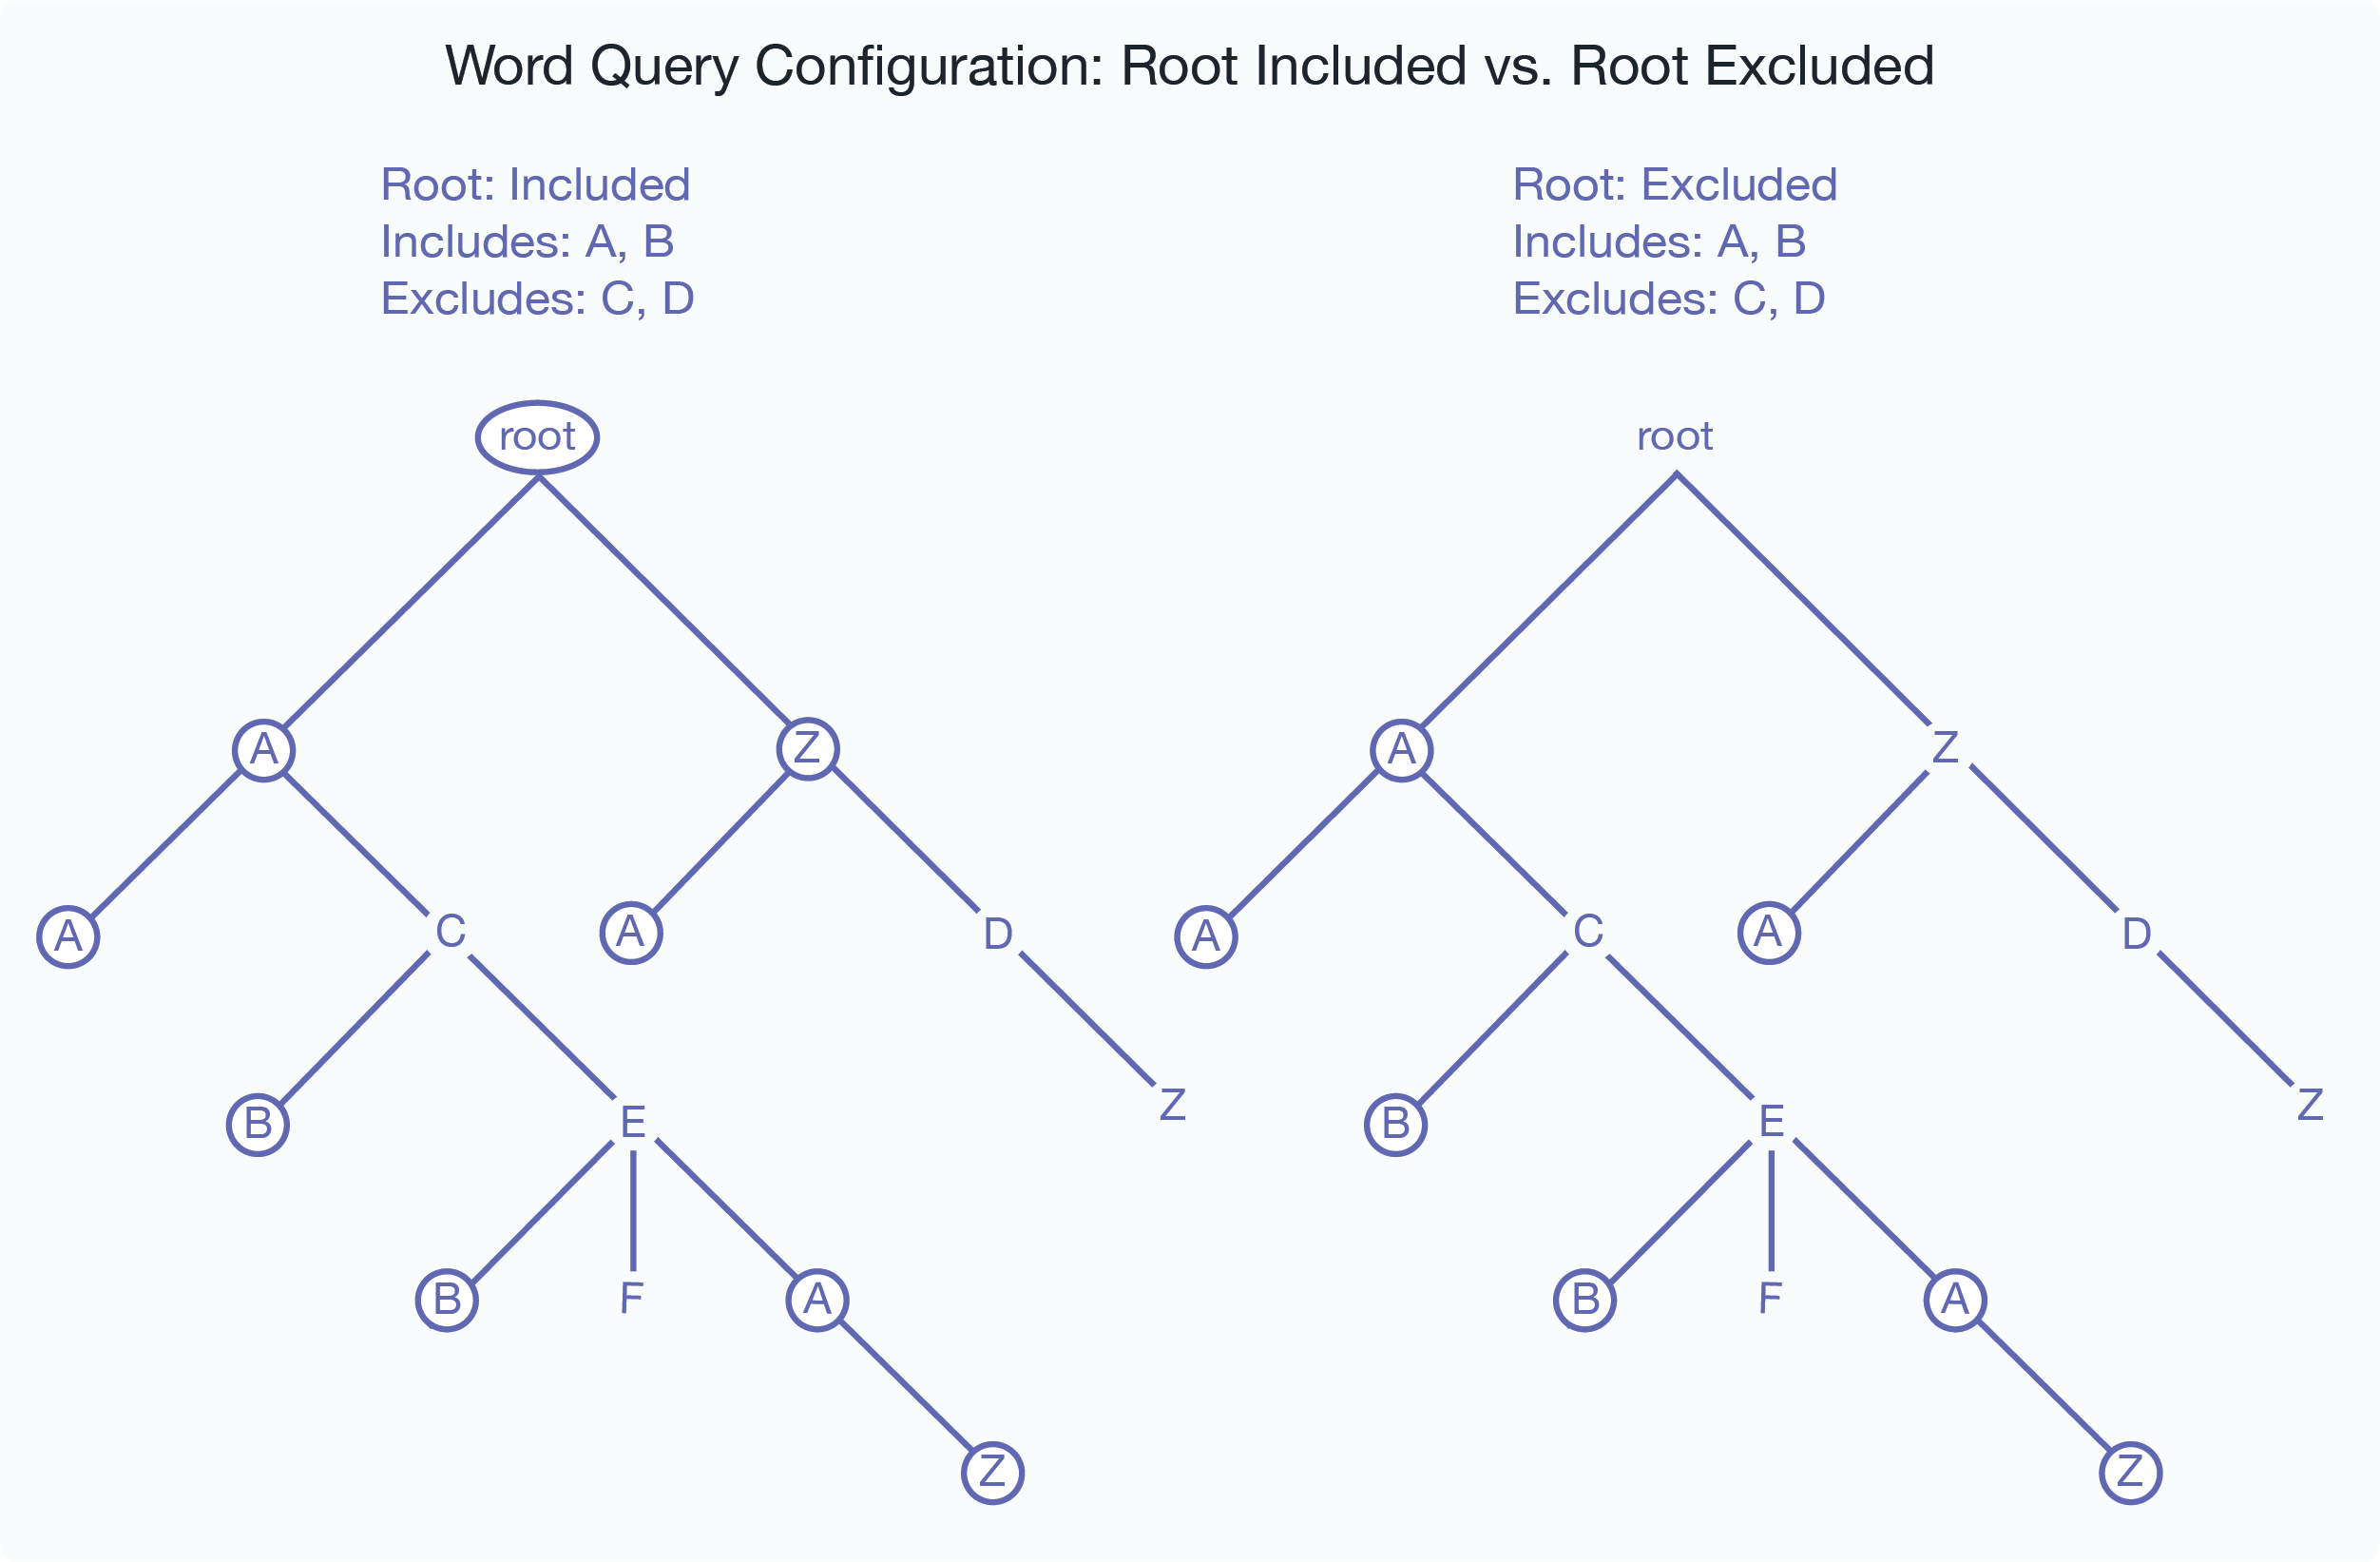 Figure showing what is included for two configurations, one with the root node included and one with the root node excluded.